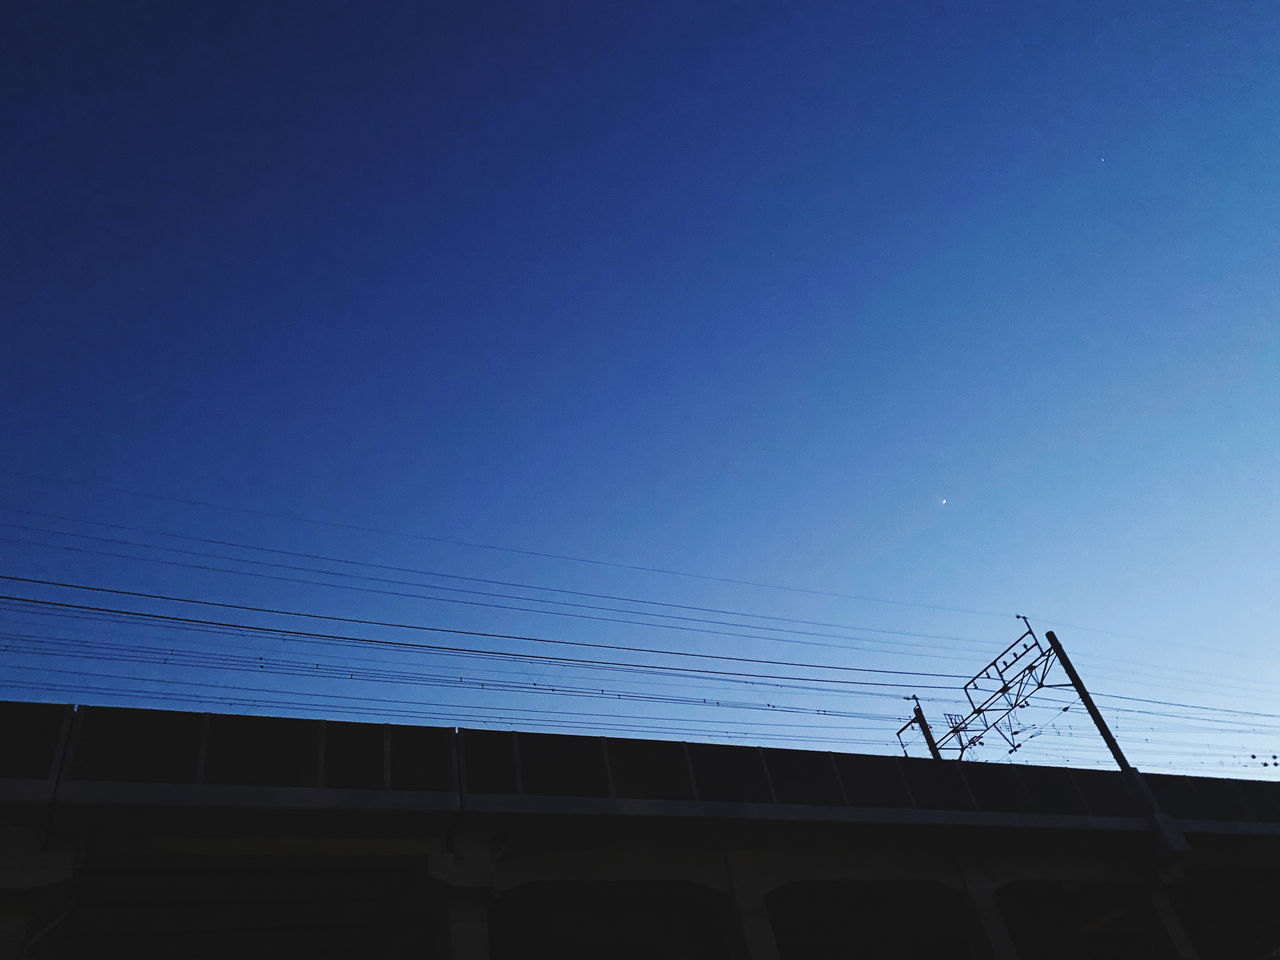 LOW ANGLE VIEW OF CABLES AGAINST CLEAR BLUE SKY